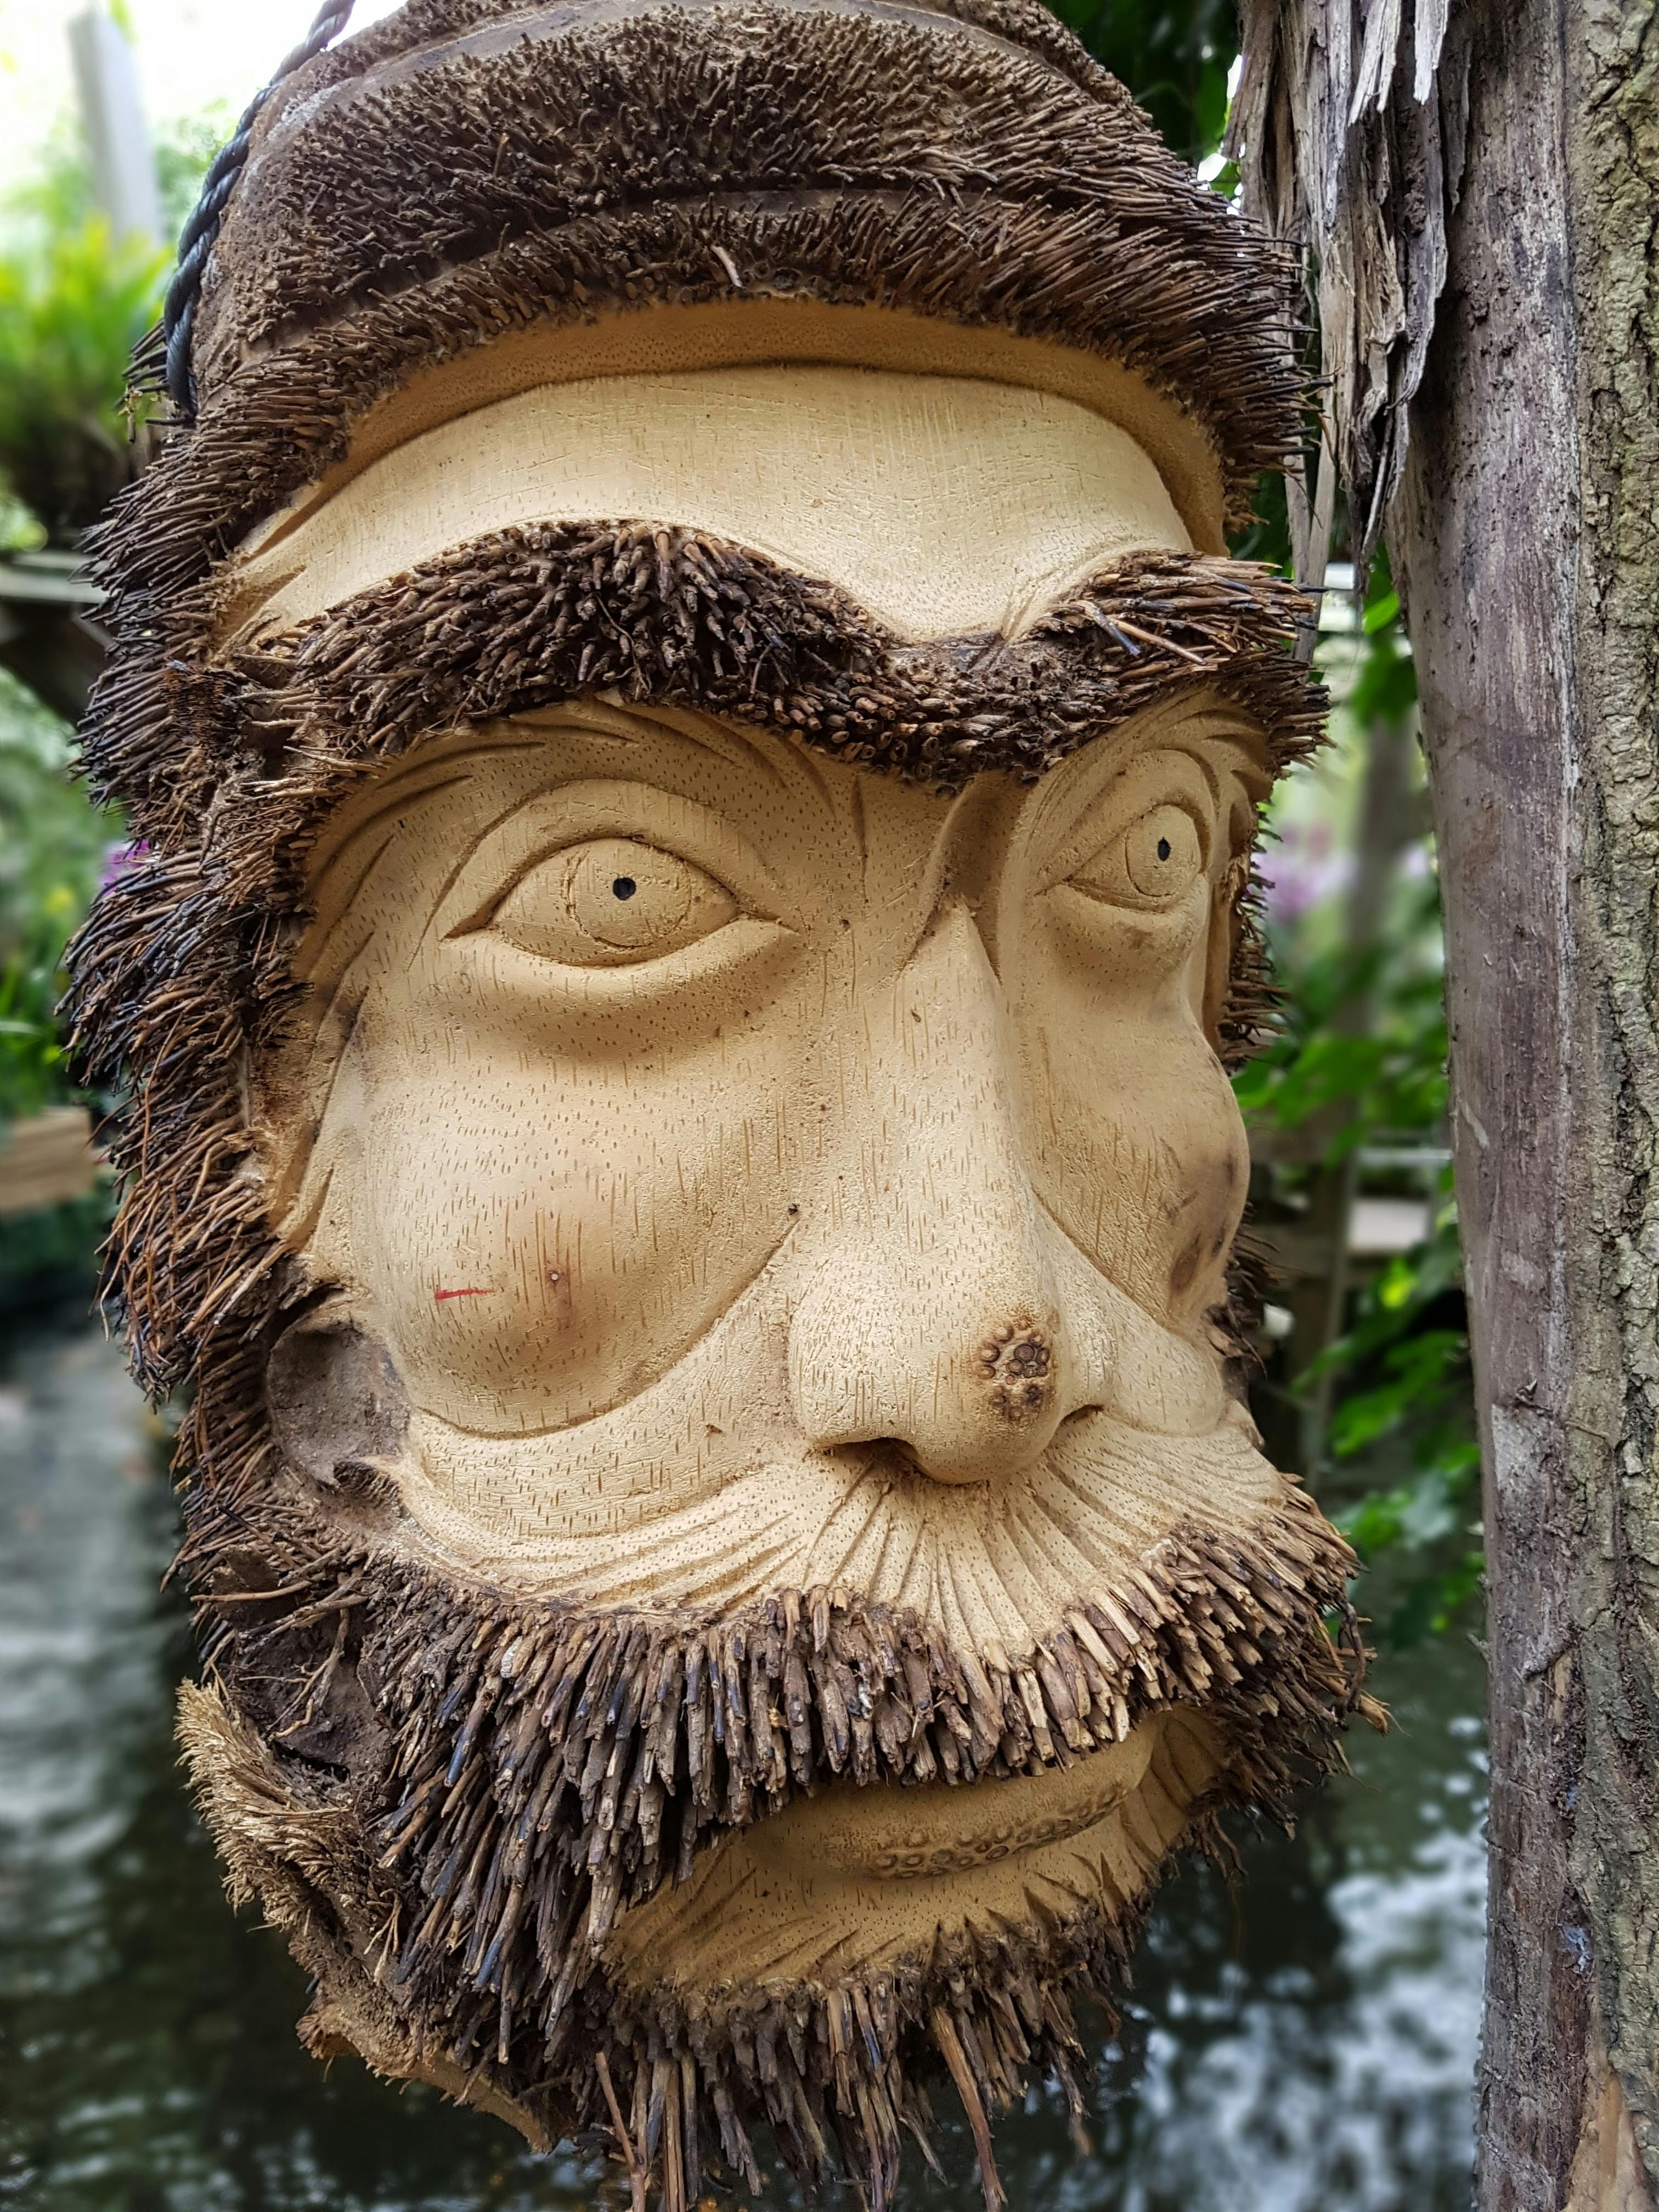 Free stock photo of Head sculpture, Woodcarving